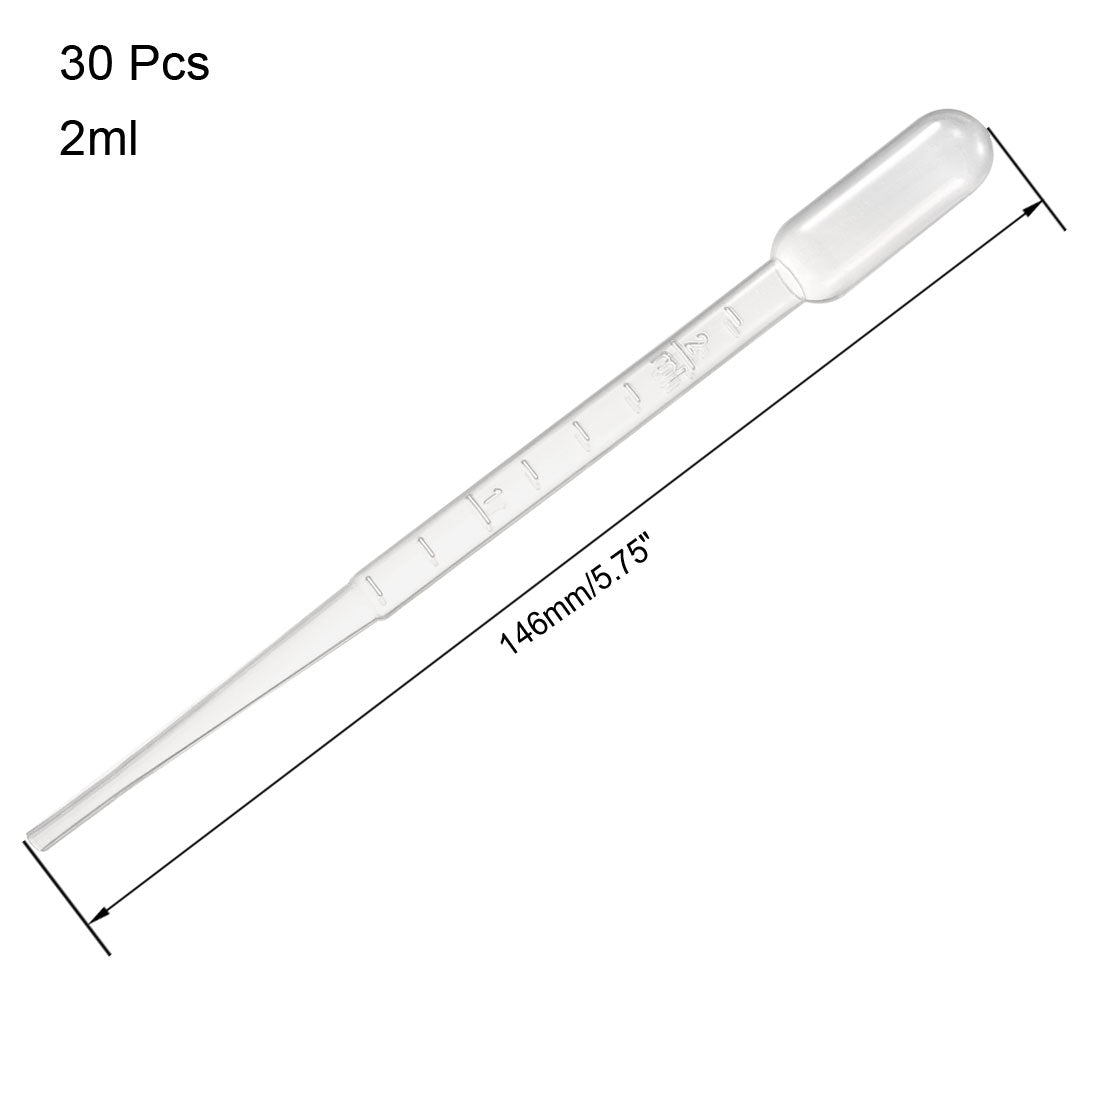 uxcell Uxcell 30 Pcs 2ml Disposable Pasteur Pipettes Test Tubes Liquid Drop Droppers Graduated 146mm Long